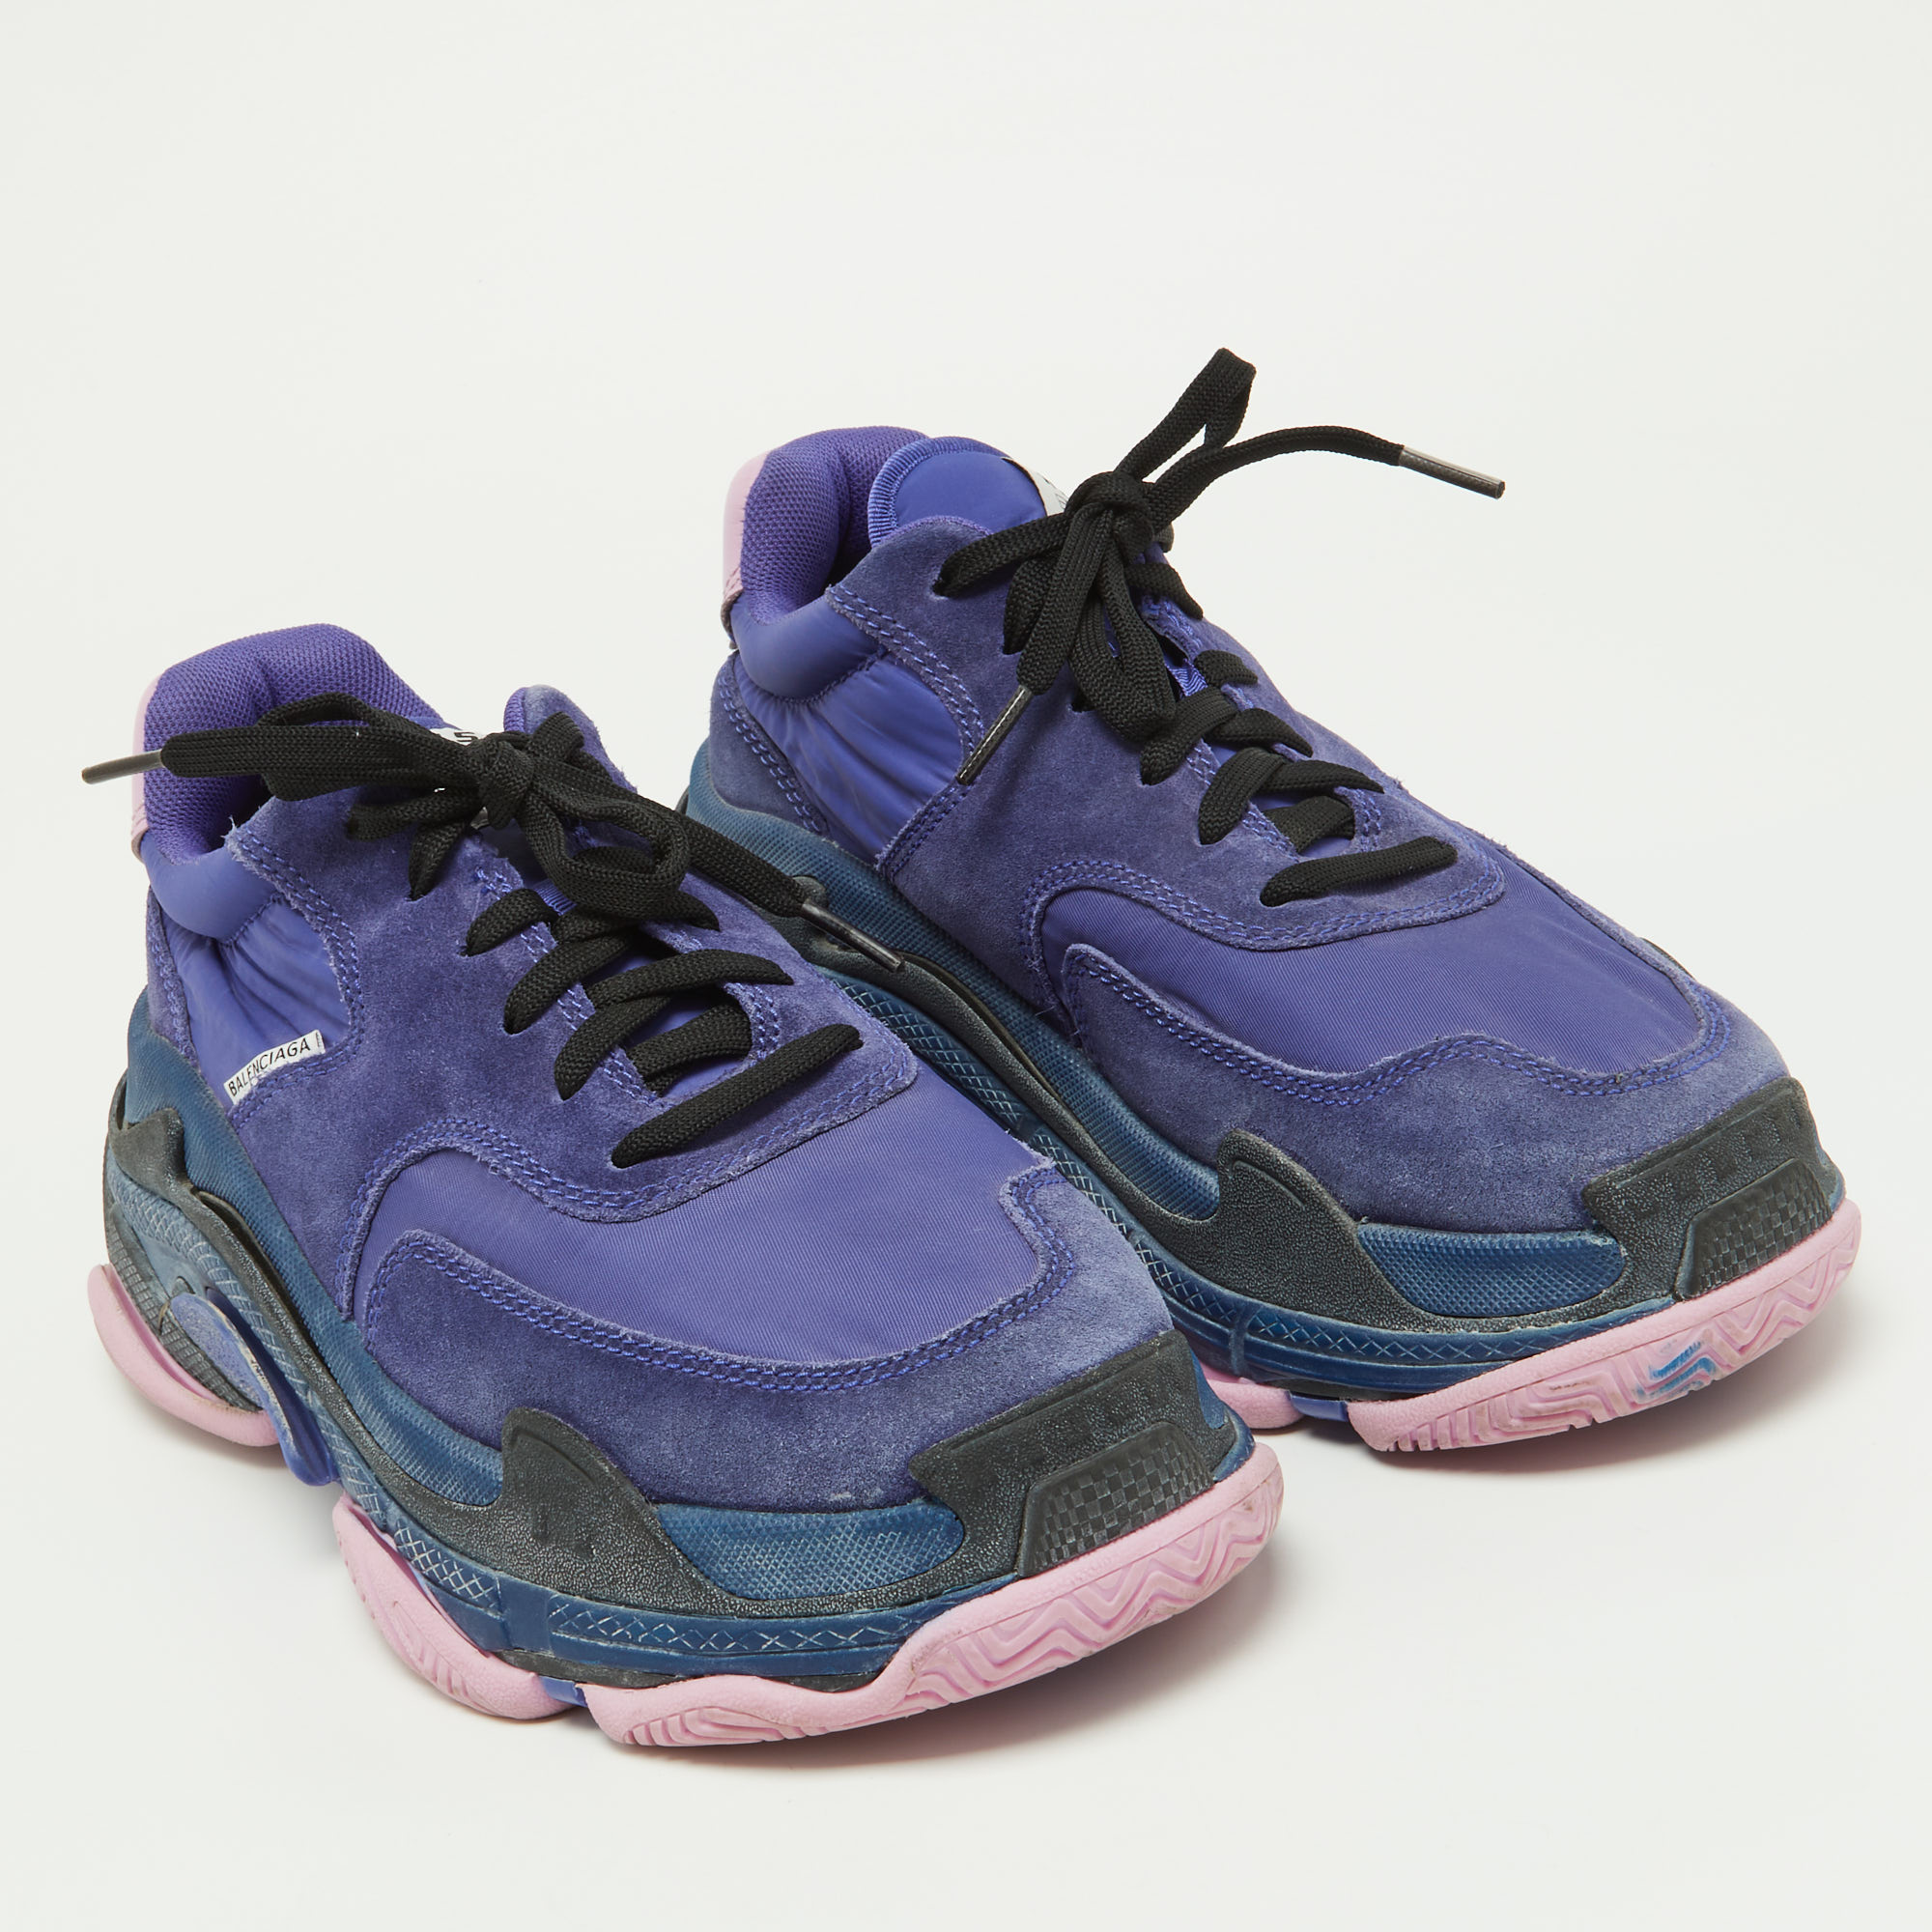 Balenciaga Purple/Pink Nylon And Leather Triple S Sneakers Size 39